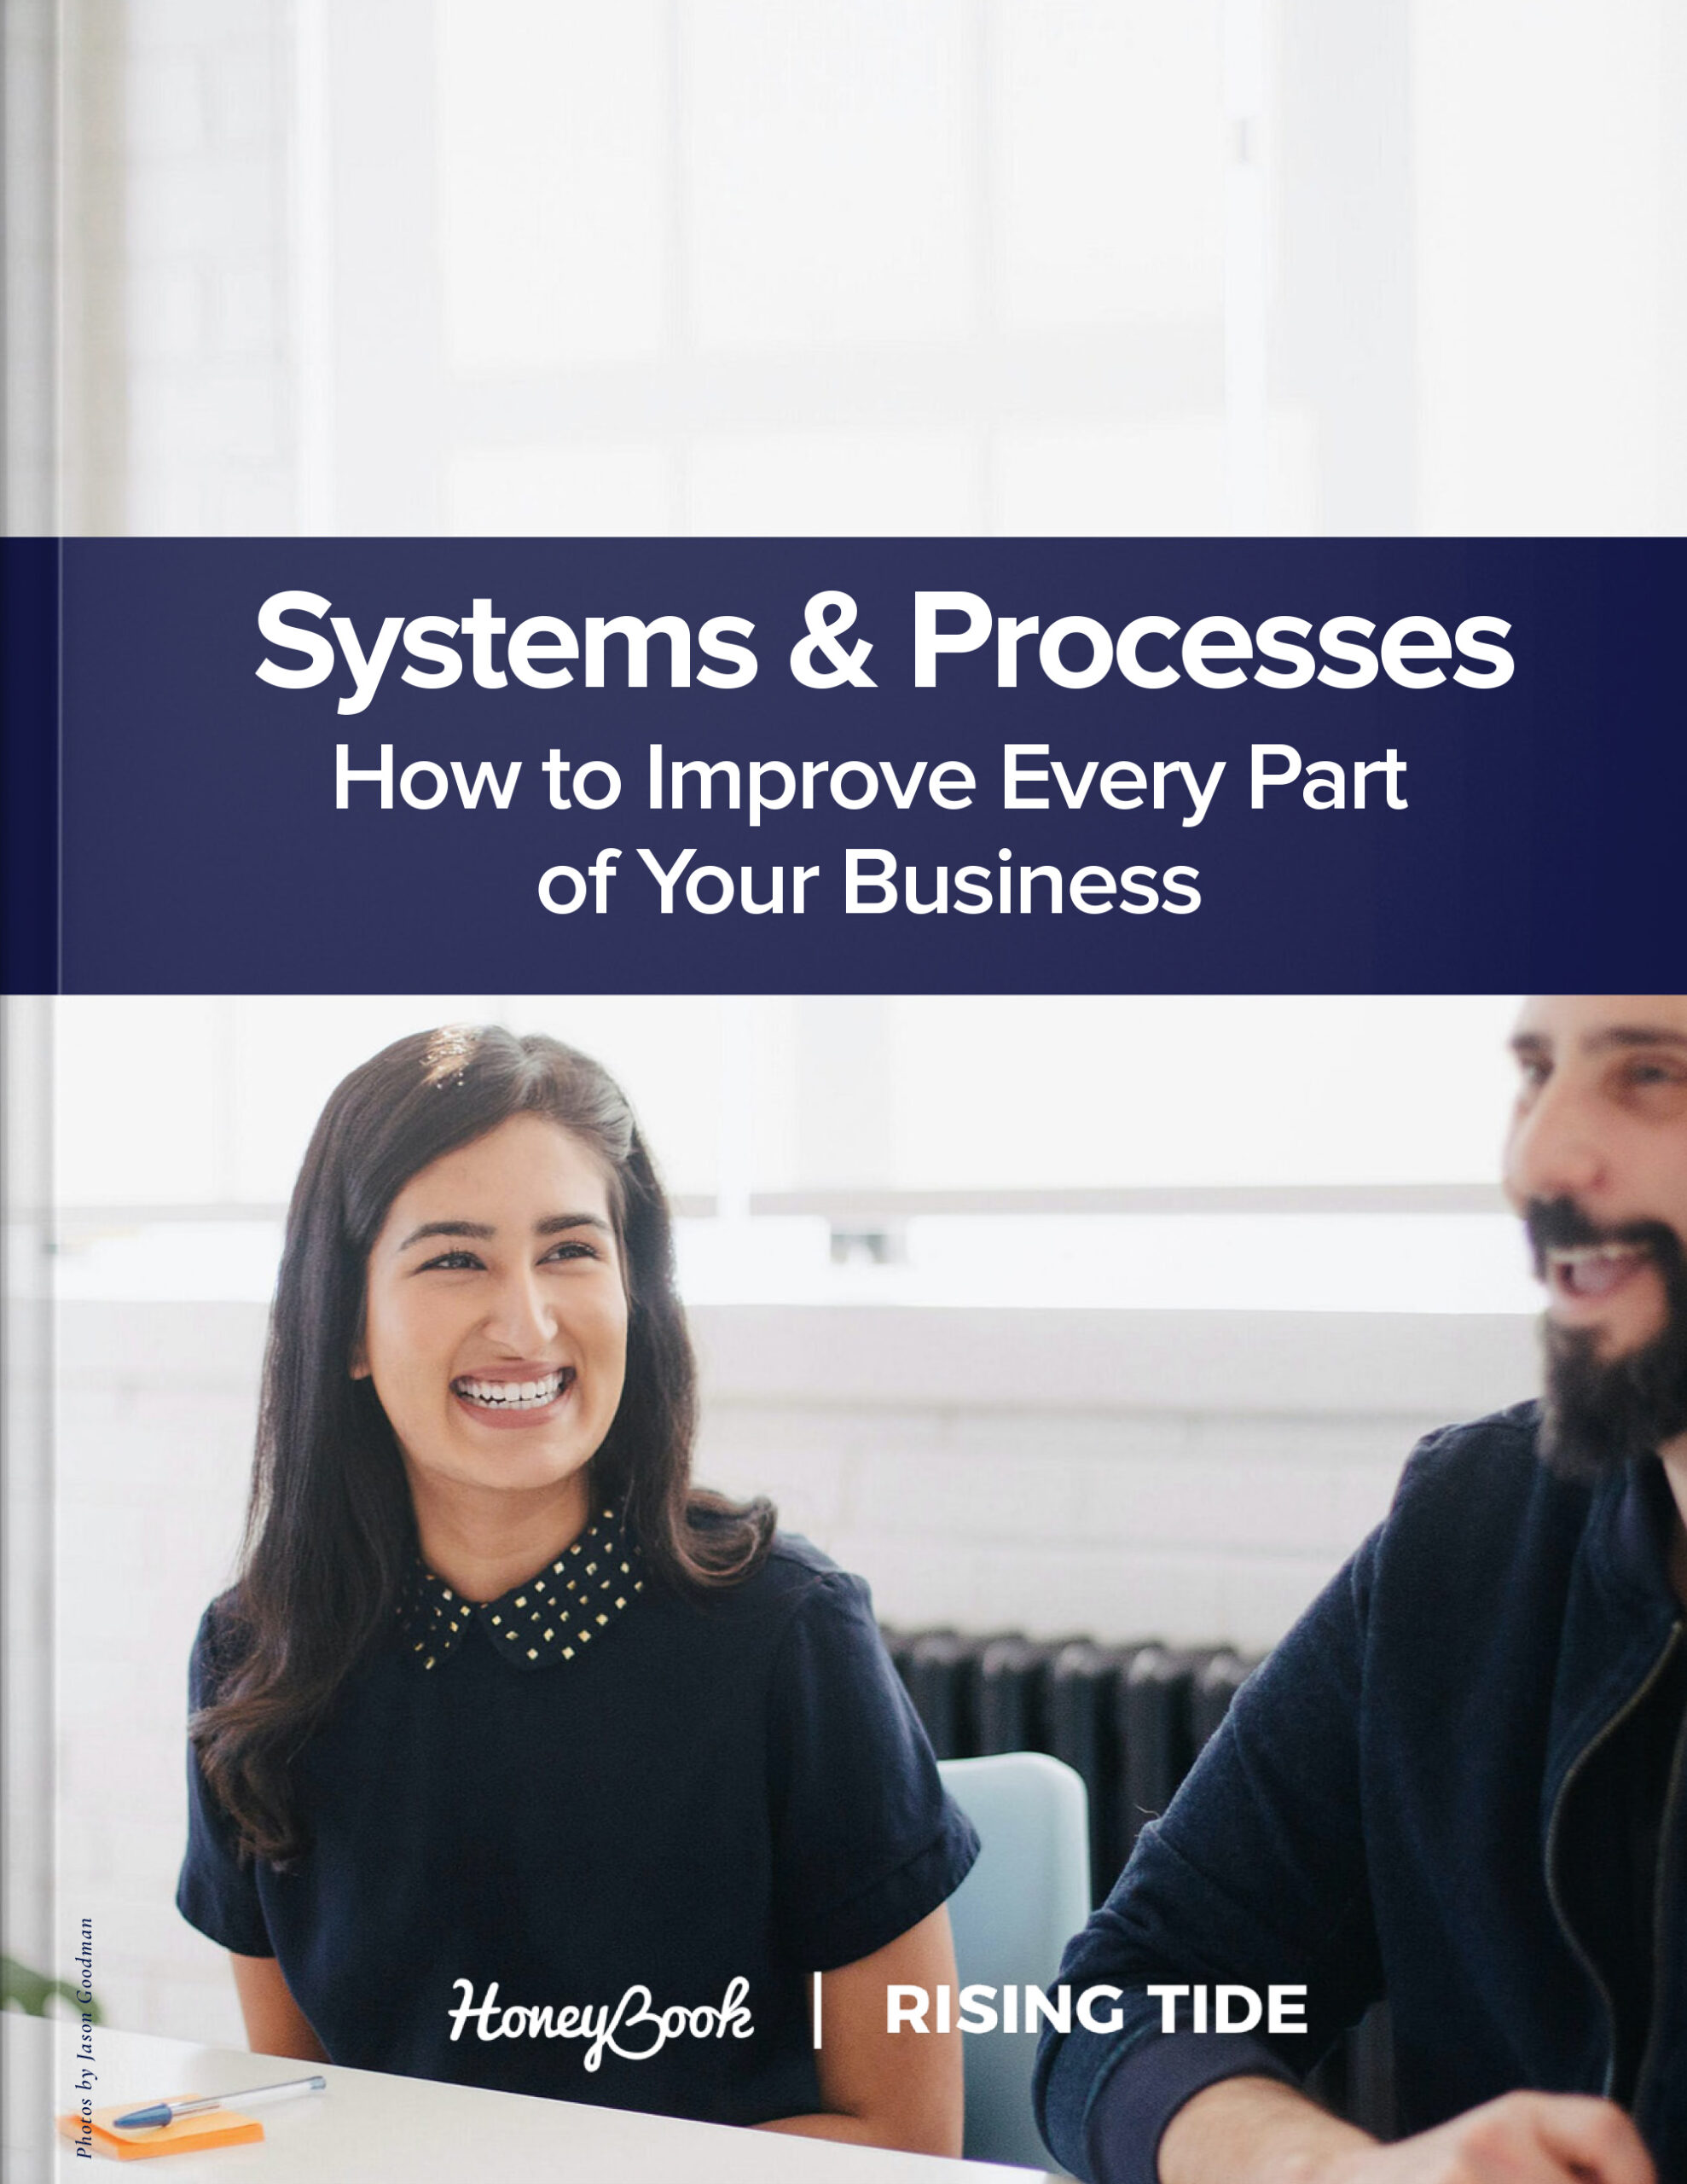 Systems and Process: How to Improve Every Part of Your Business